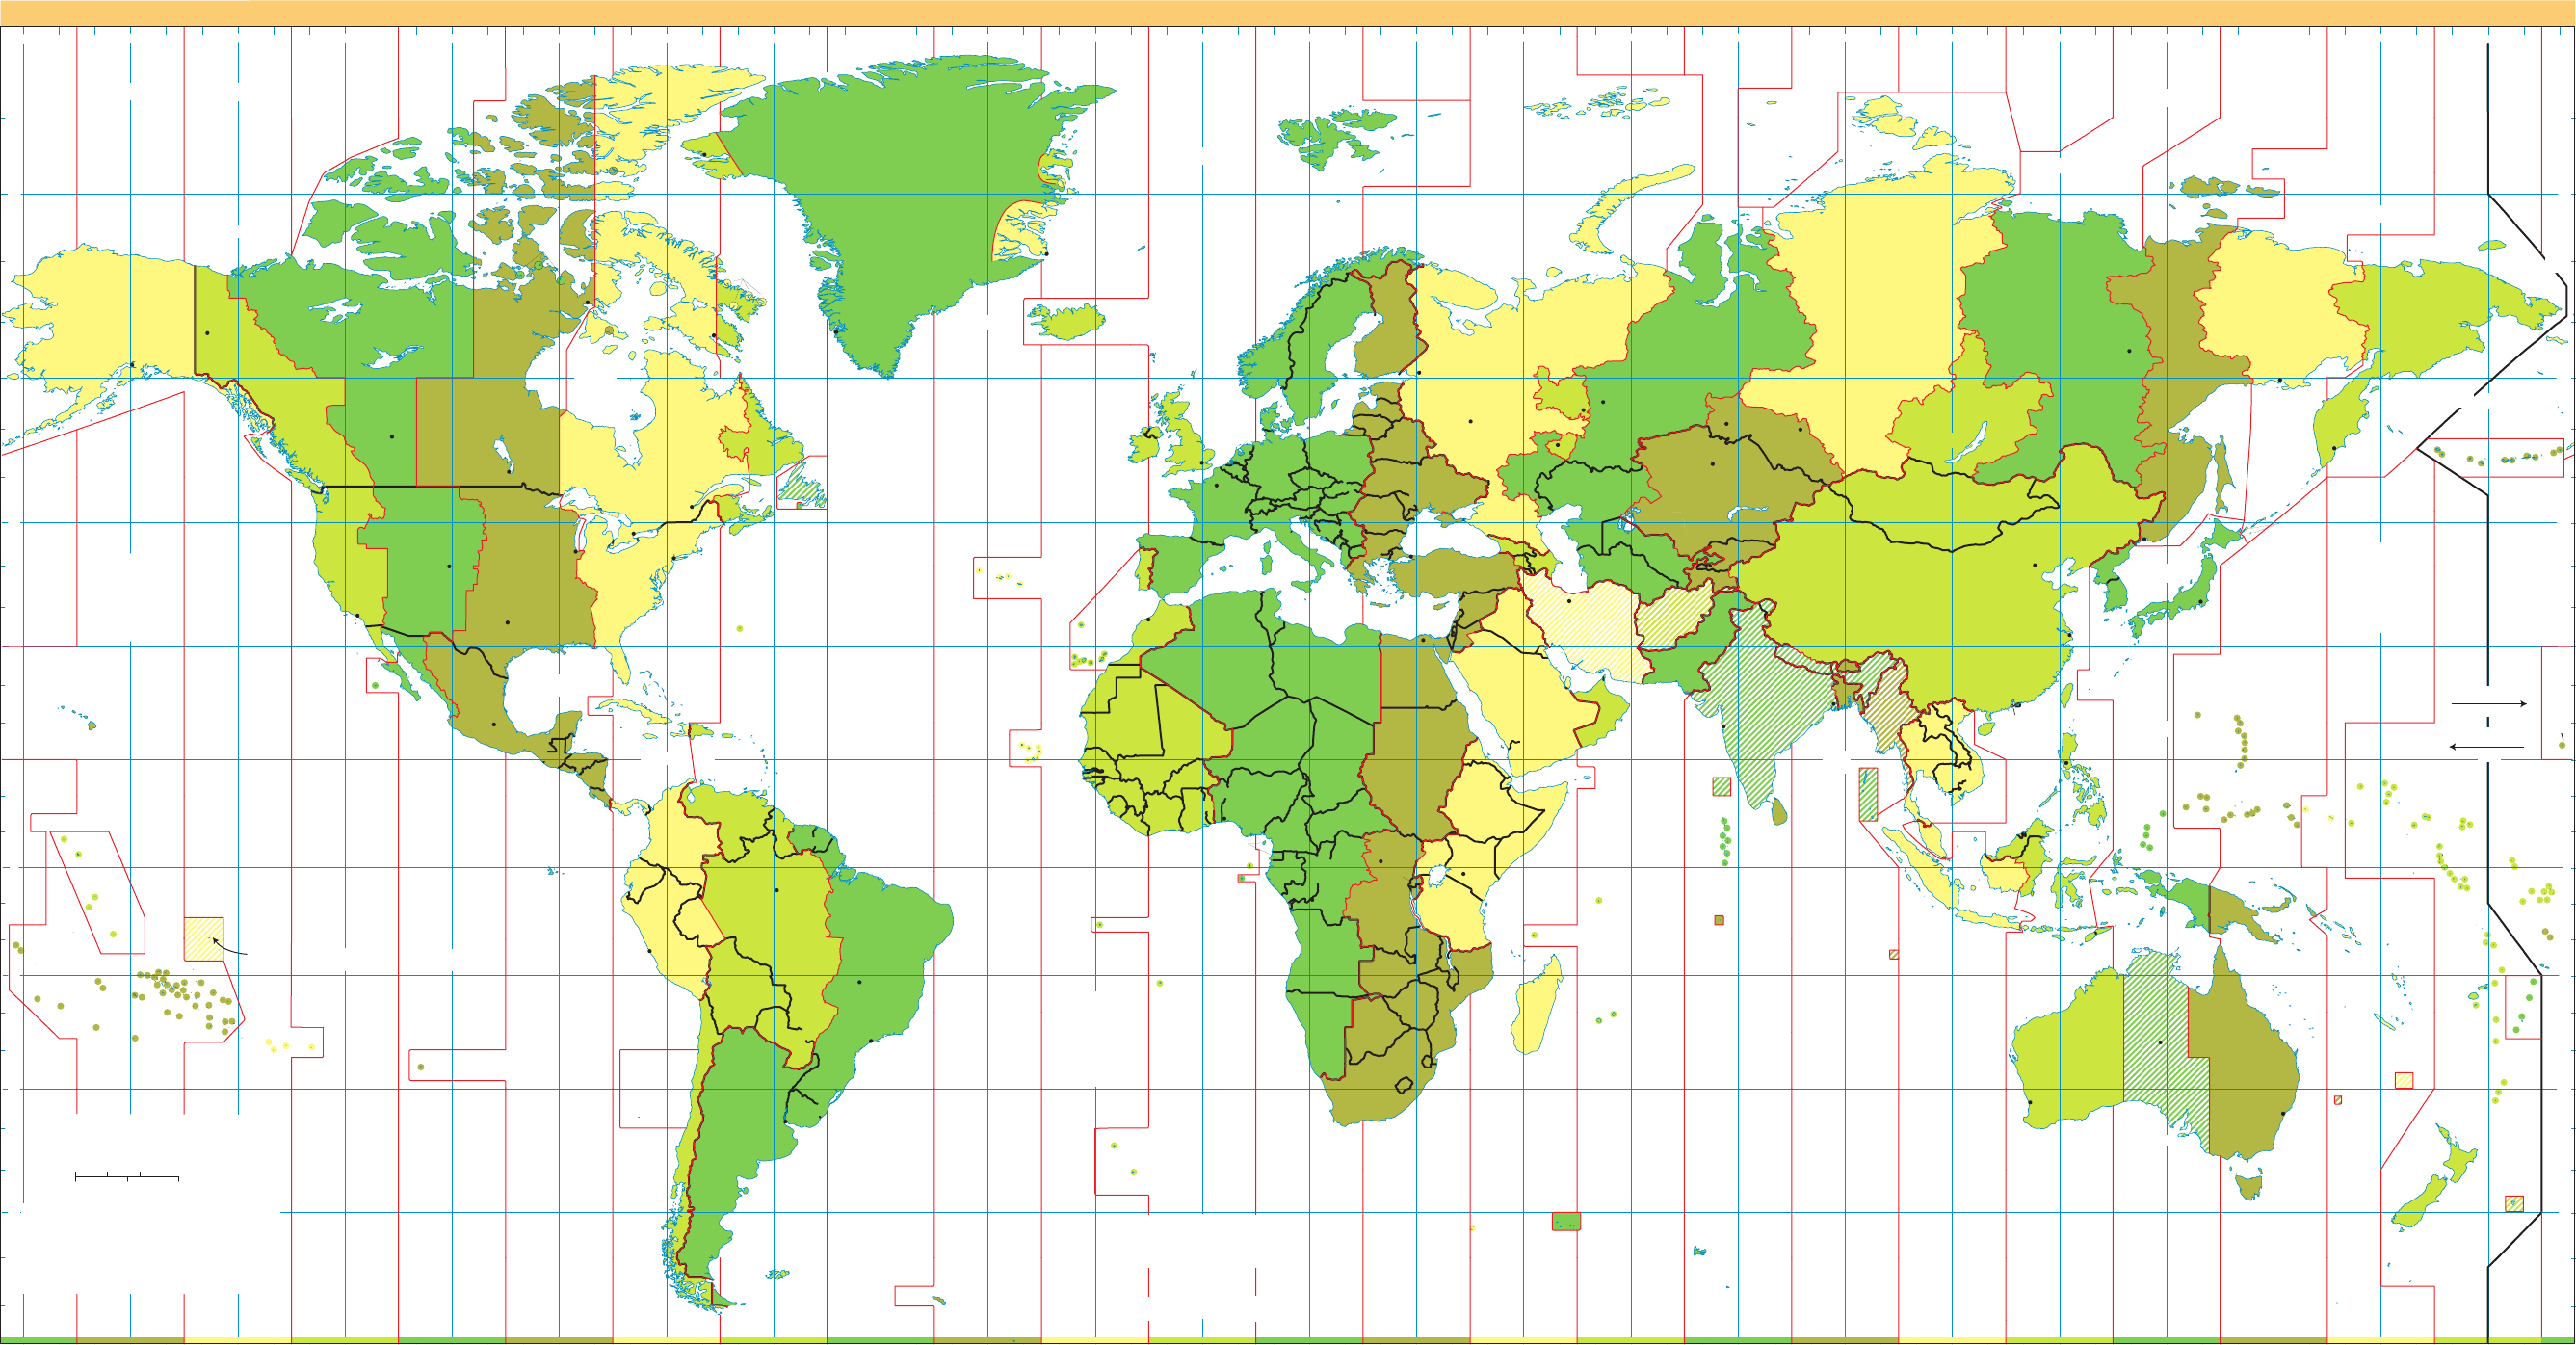 Standard Time Zones of The World